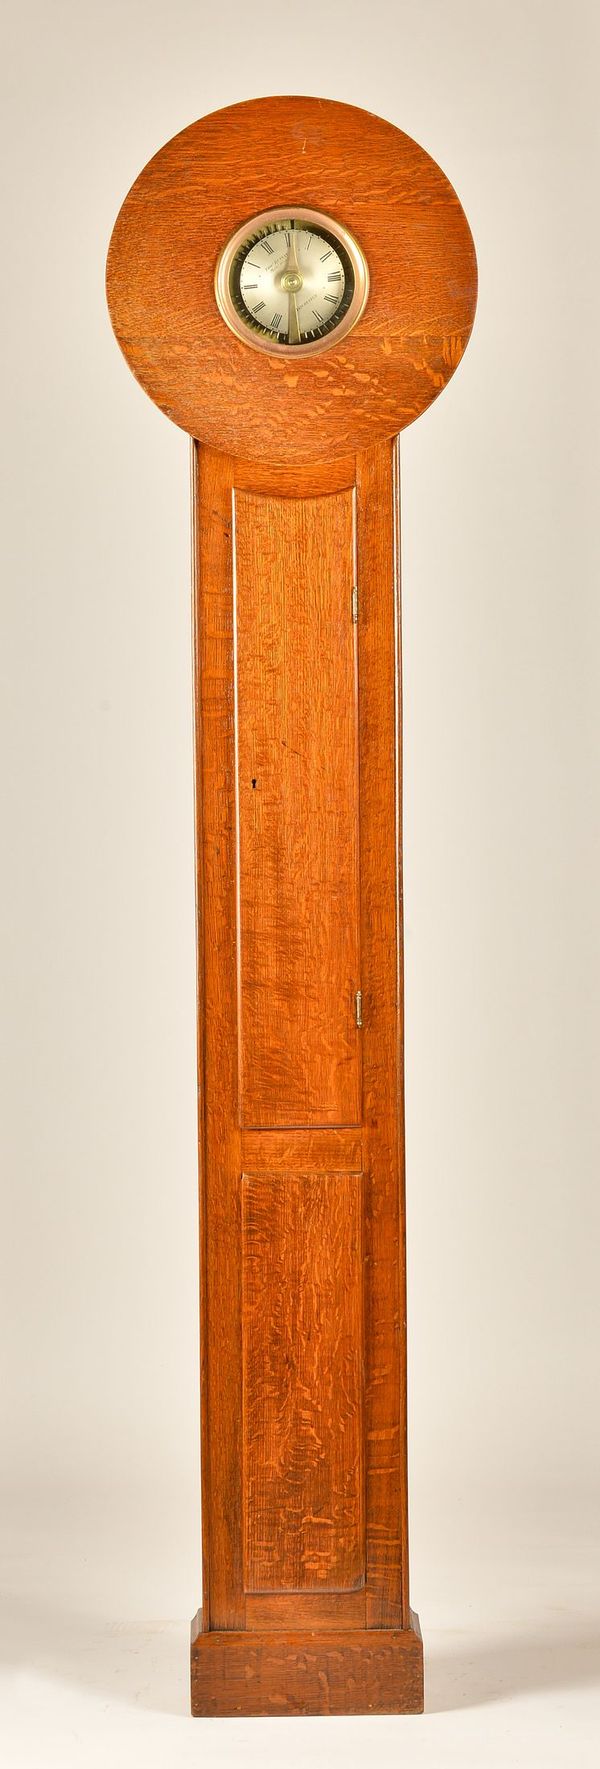 A 19TH CENTURY OAK CASED 30-HOUR WATCHMAN'S TIMEPIECE